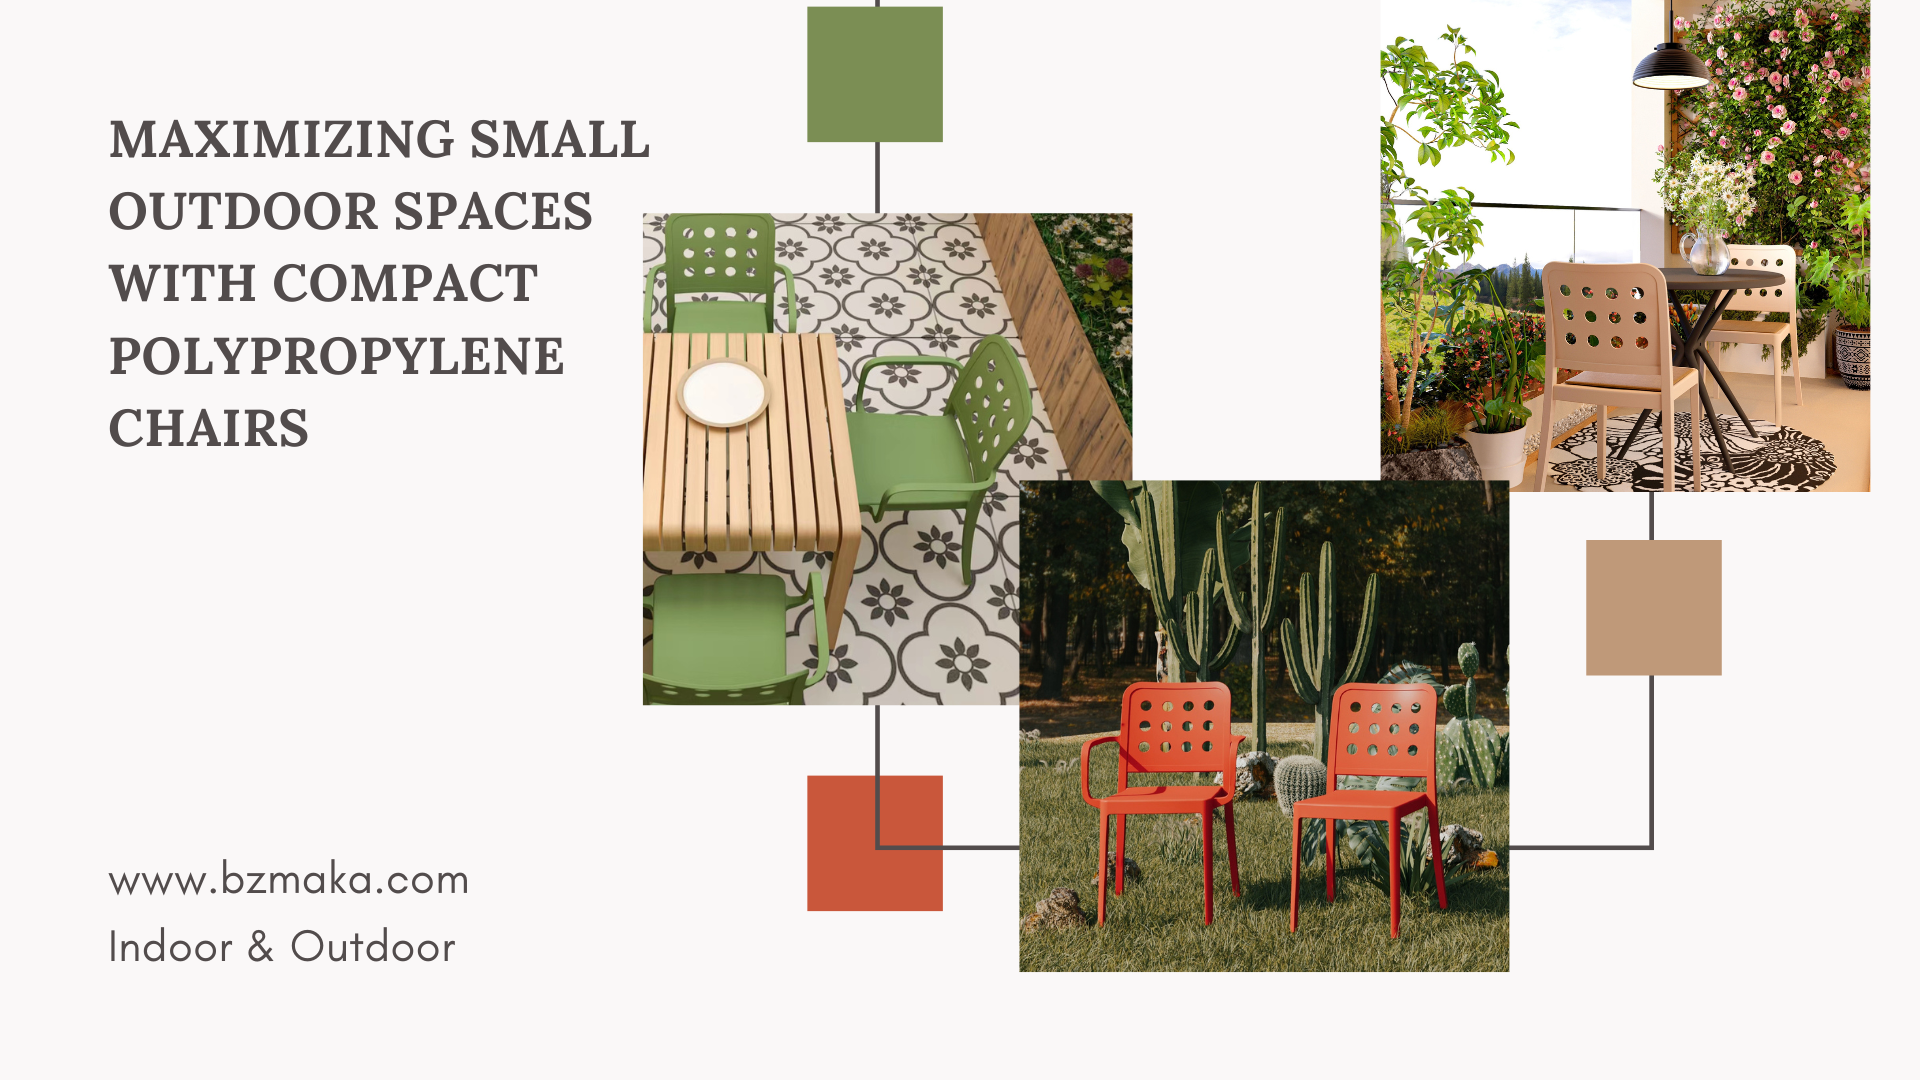 Maximizing Small Outdoor Spaces with Compact Polypropylene Chairs